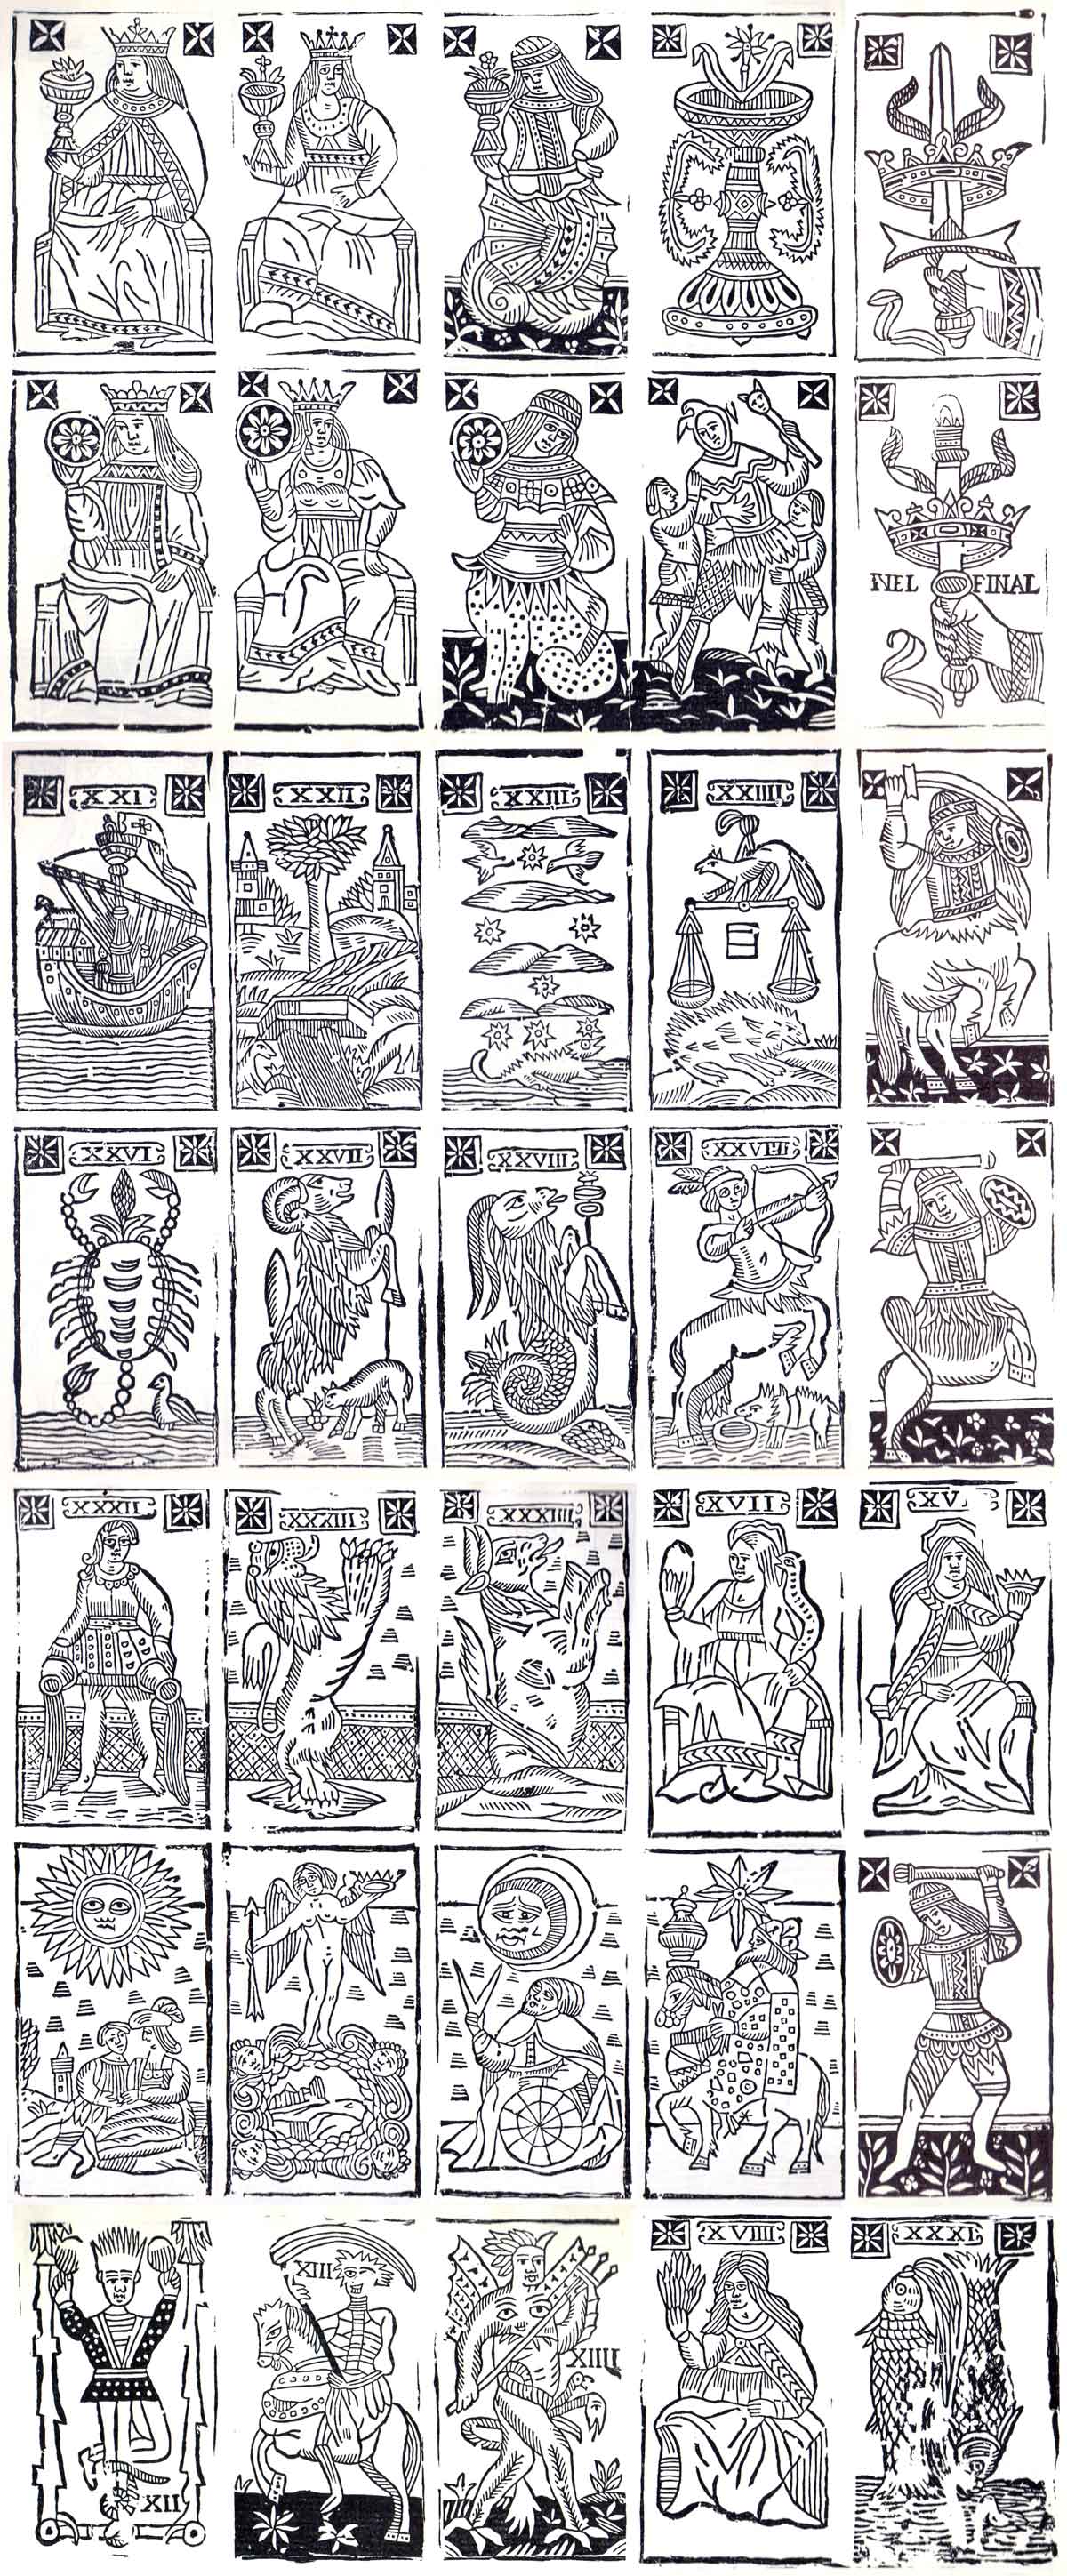 17th century Minchiate cards reprinted from the original woodblocks